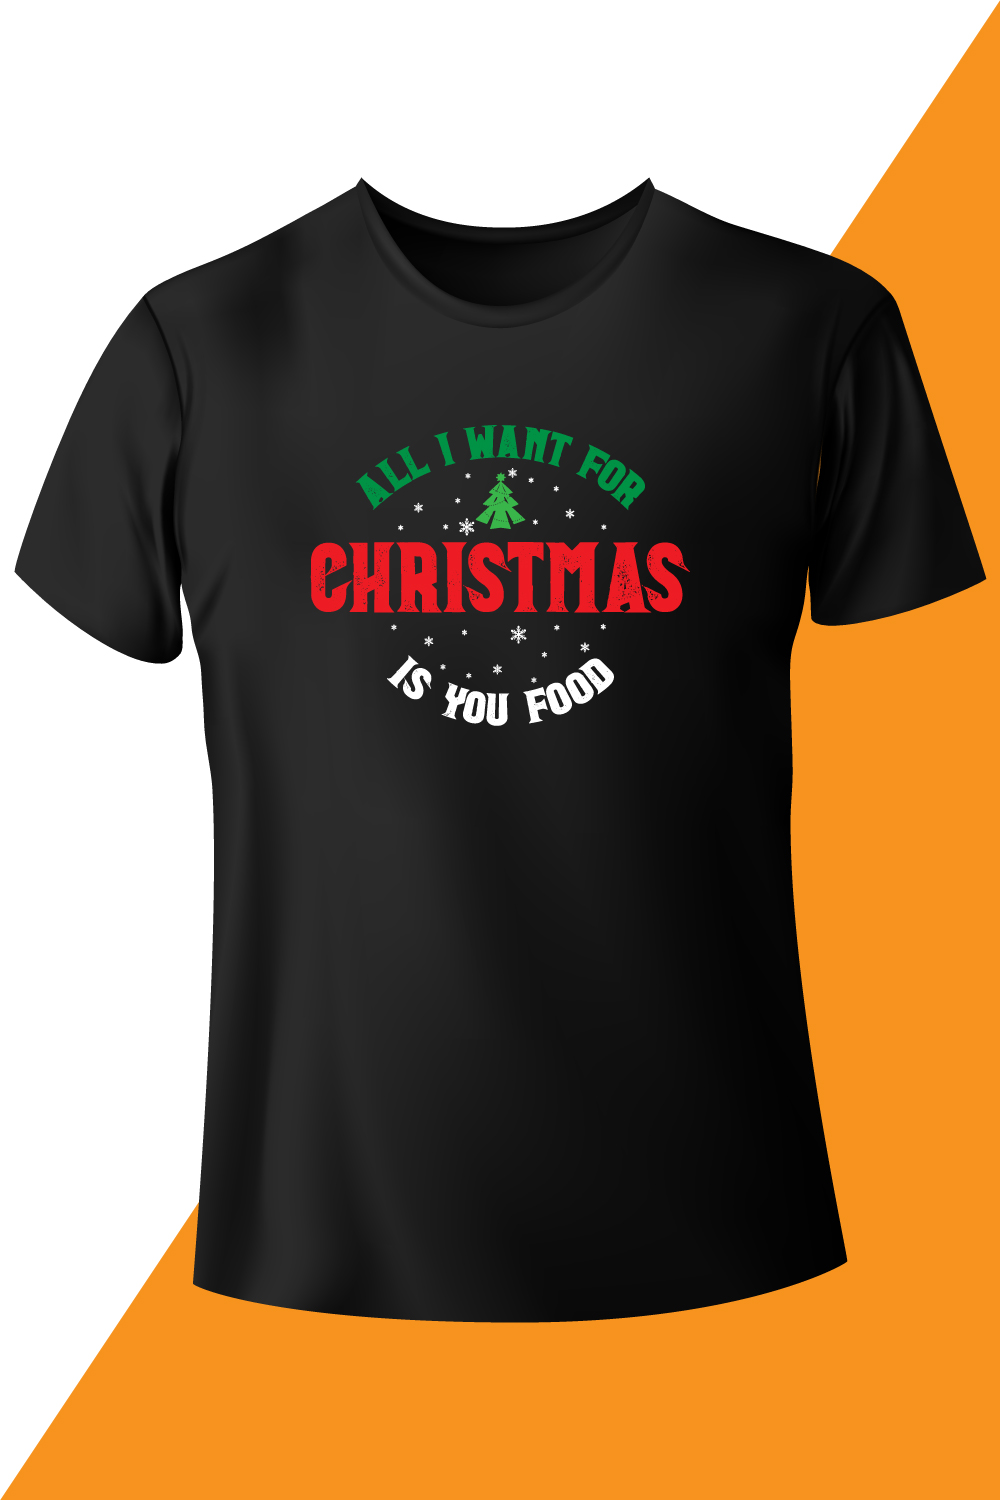 Image of a black T-shirt with a beautiful inscription on the theme of Christmas.